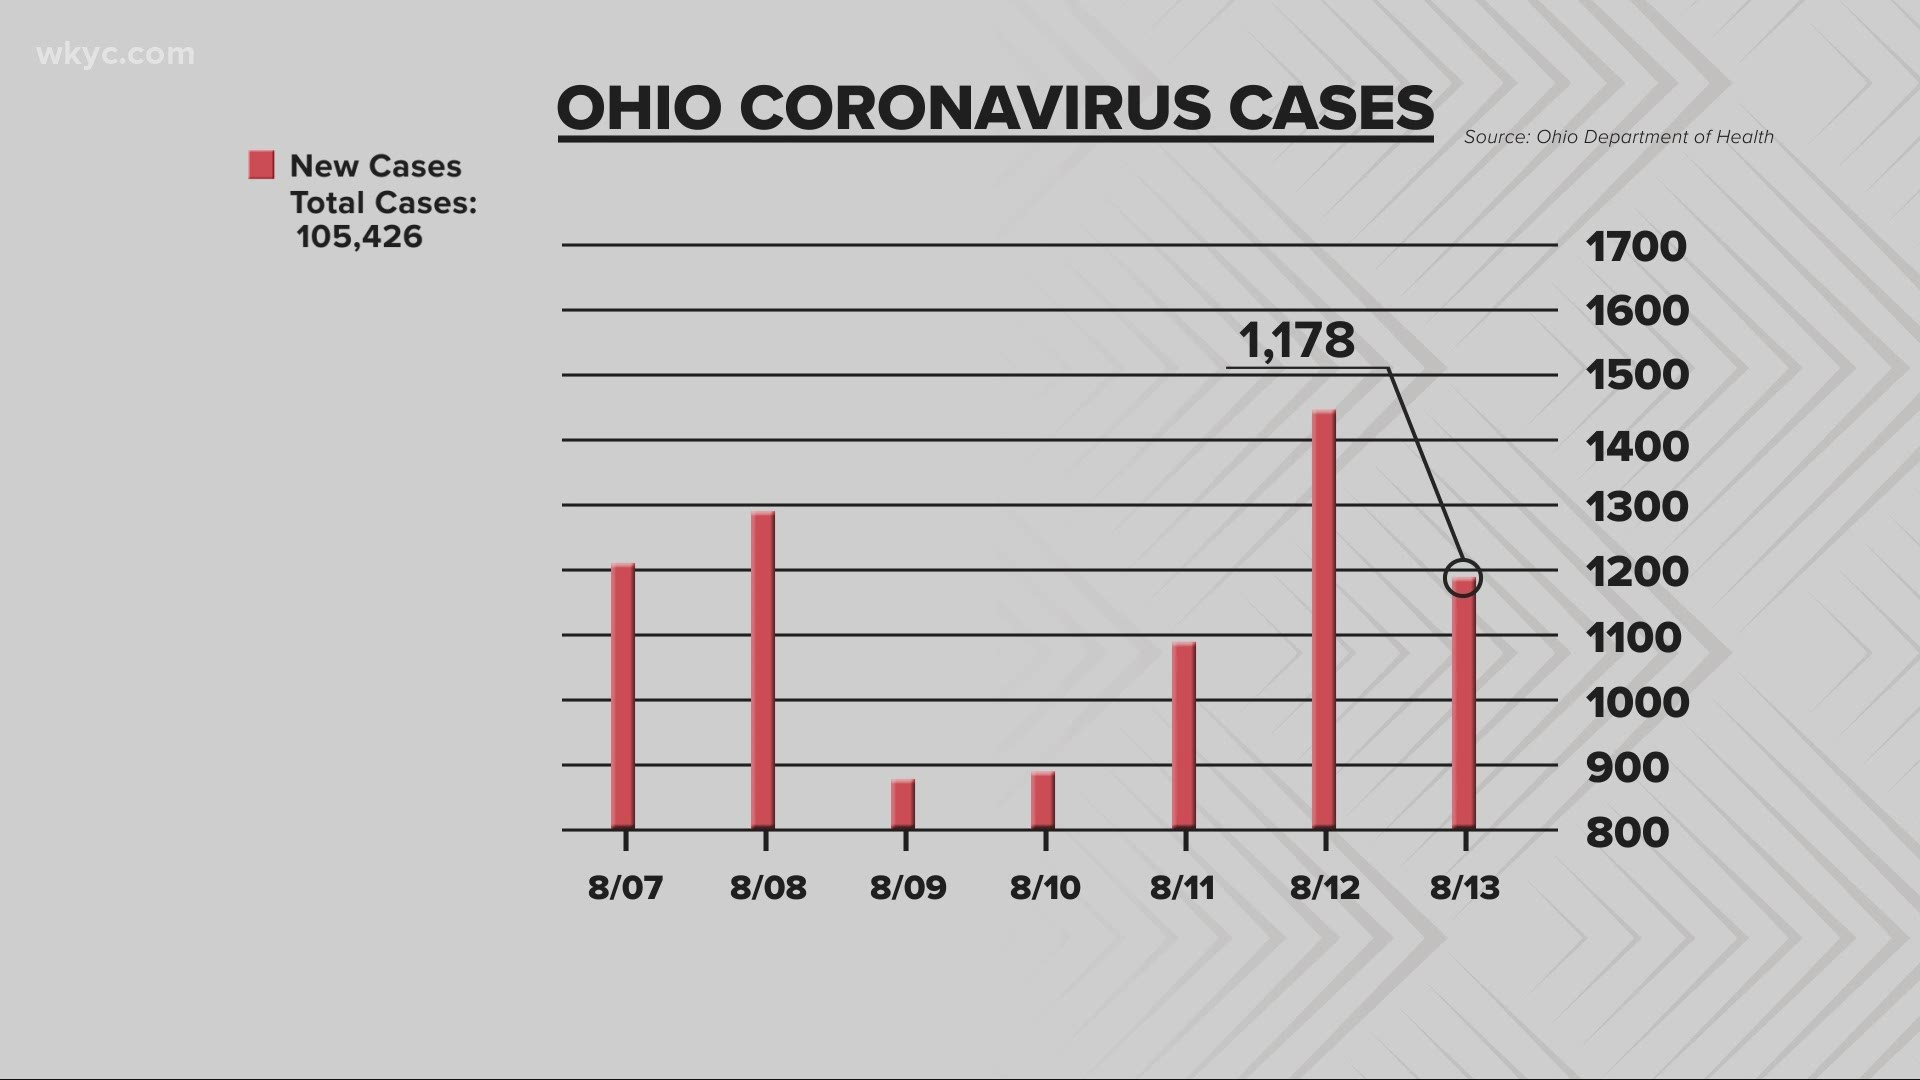 Within the last 24 hours, we have had 1,178 new COVID-19 cases reported in Ohio.  That number is very close to our 21-day average.